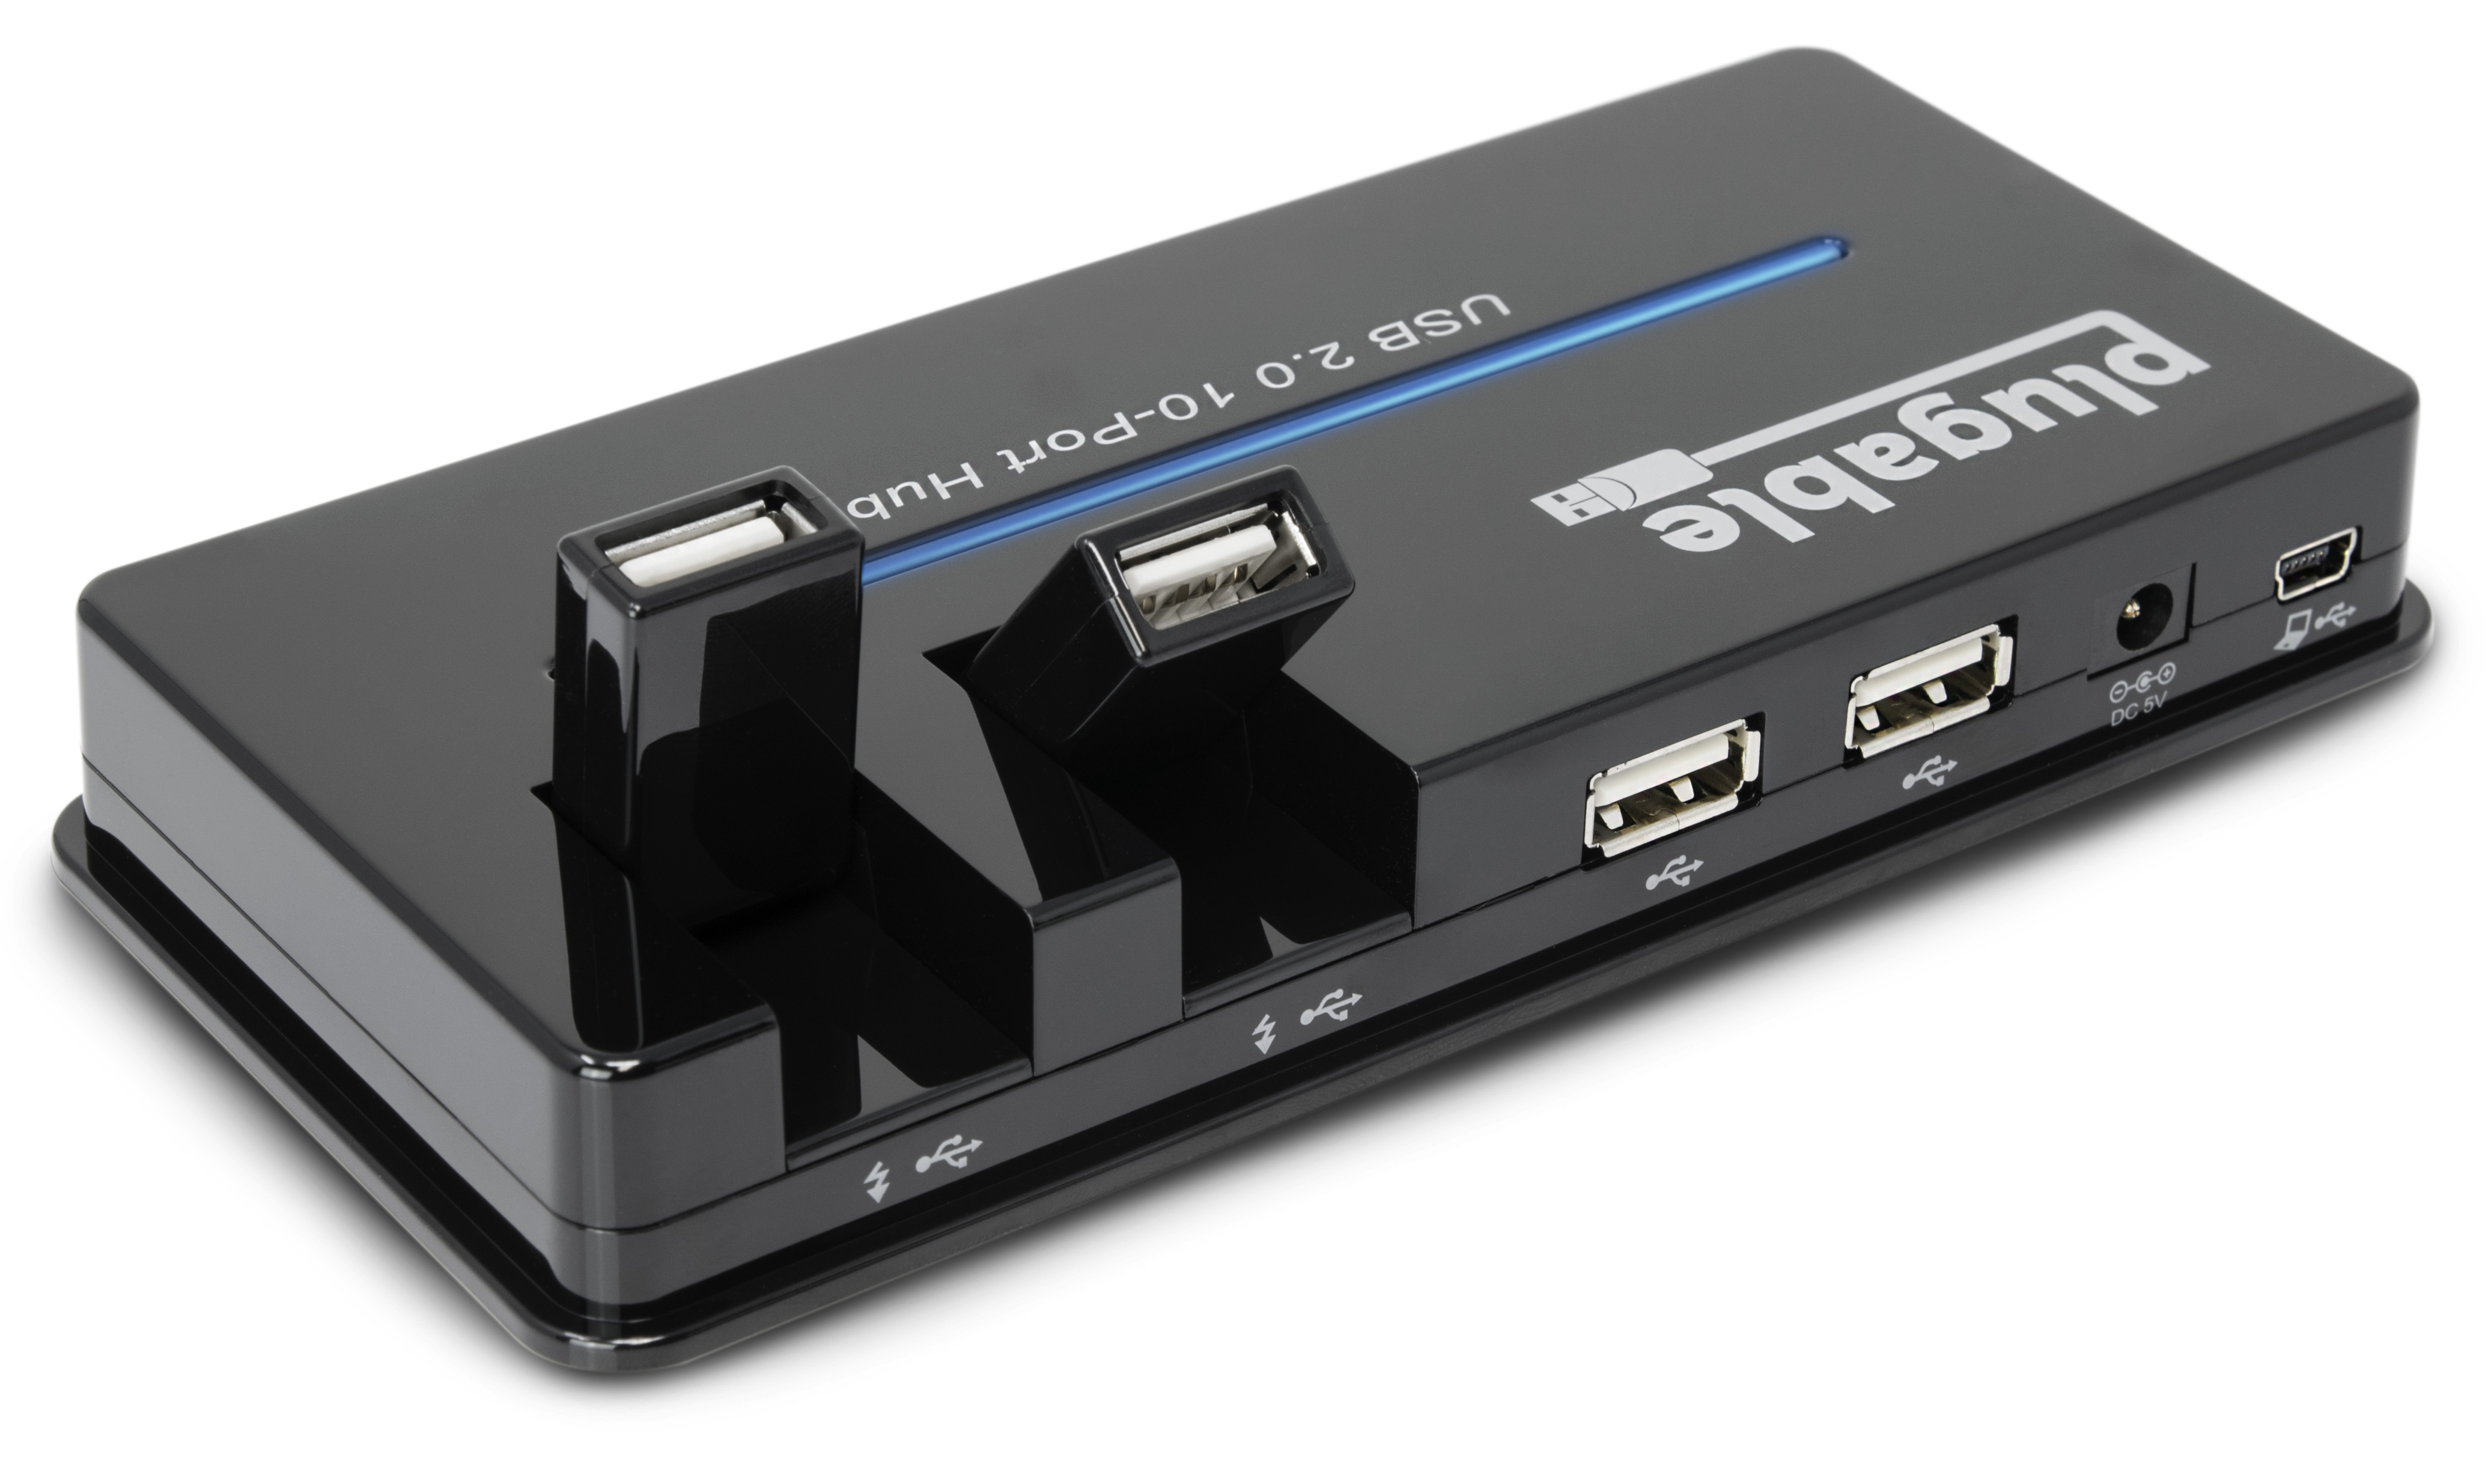 Plugable USB Hub, 10 Port - USB 2.0 with 20W Power Adapter and Two Flip-Up Ports - image 2 of 6